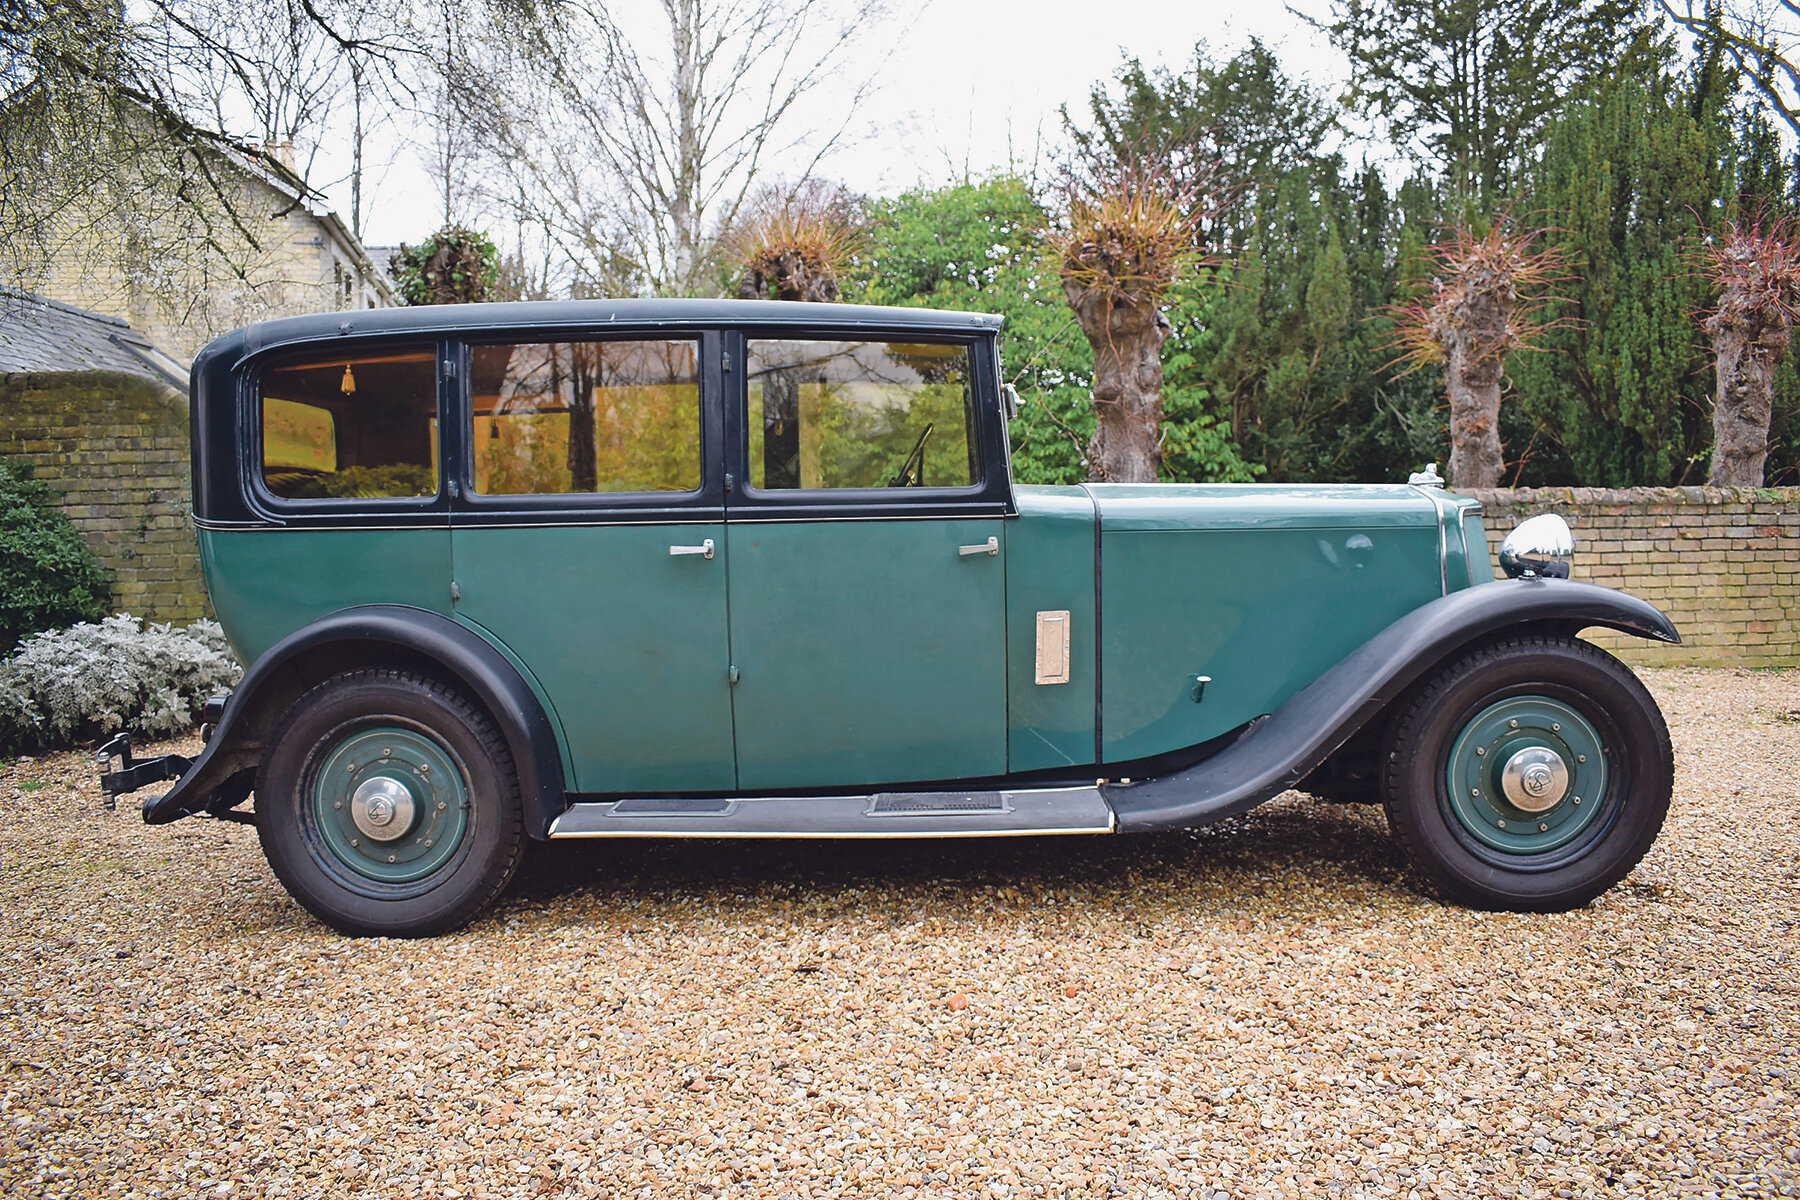 This 1932 Armstrong-Siddeley was quite a catch at auction with Brightwells, recently